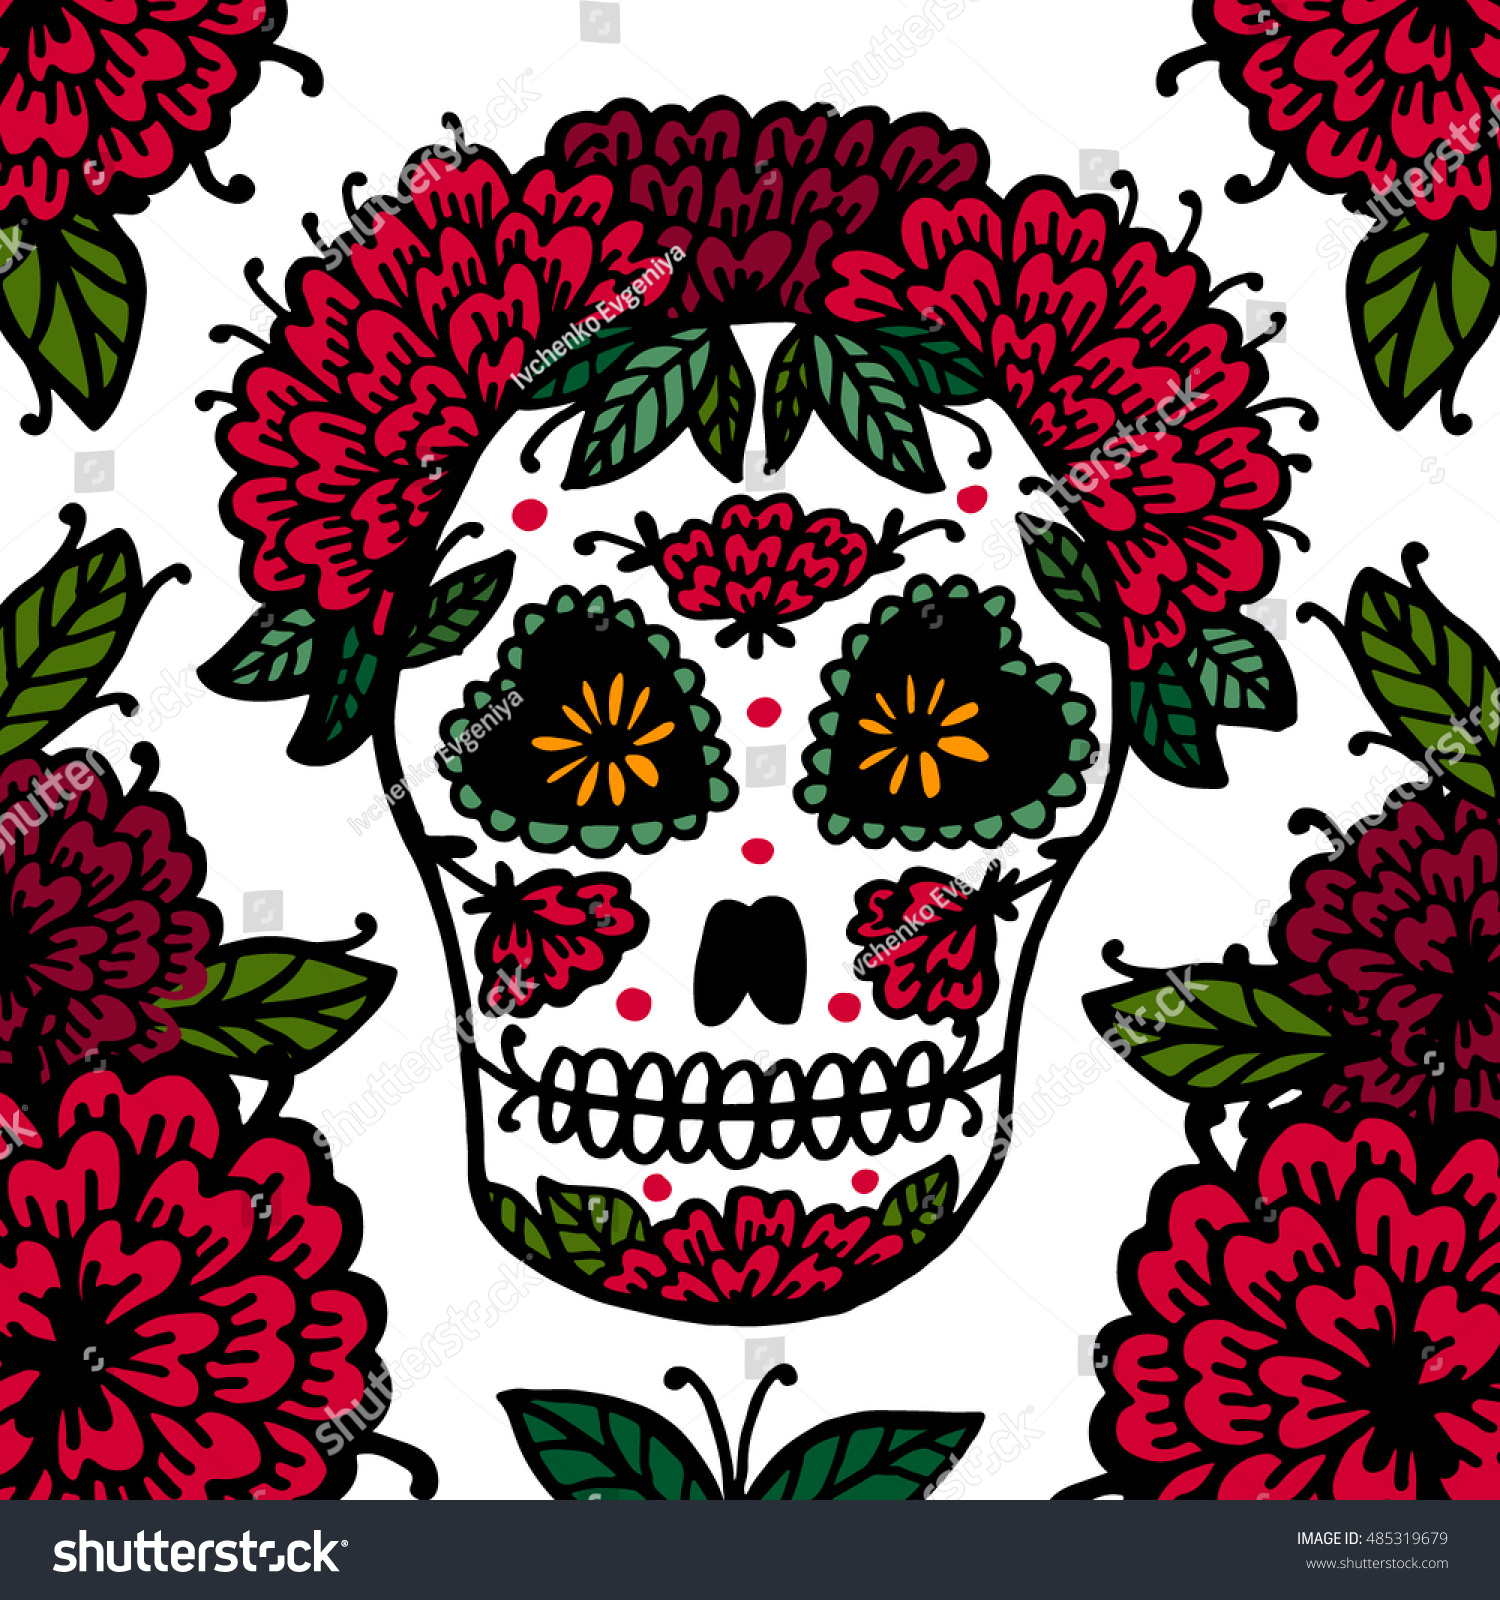 Sugar Skull 8x10 FT Photo Backdrops,Day of The Dead Colorful Skulls with Flowers Mexican Style Artistic Pattern Background for Photography Kids Adult Photo Booth Video Shoot Vinyl Studio Props 